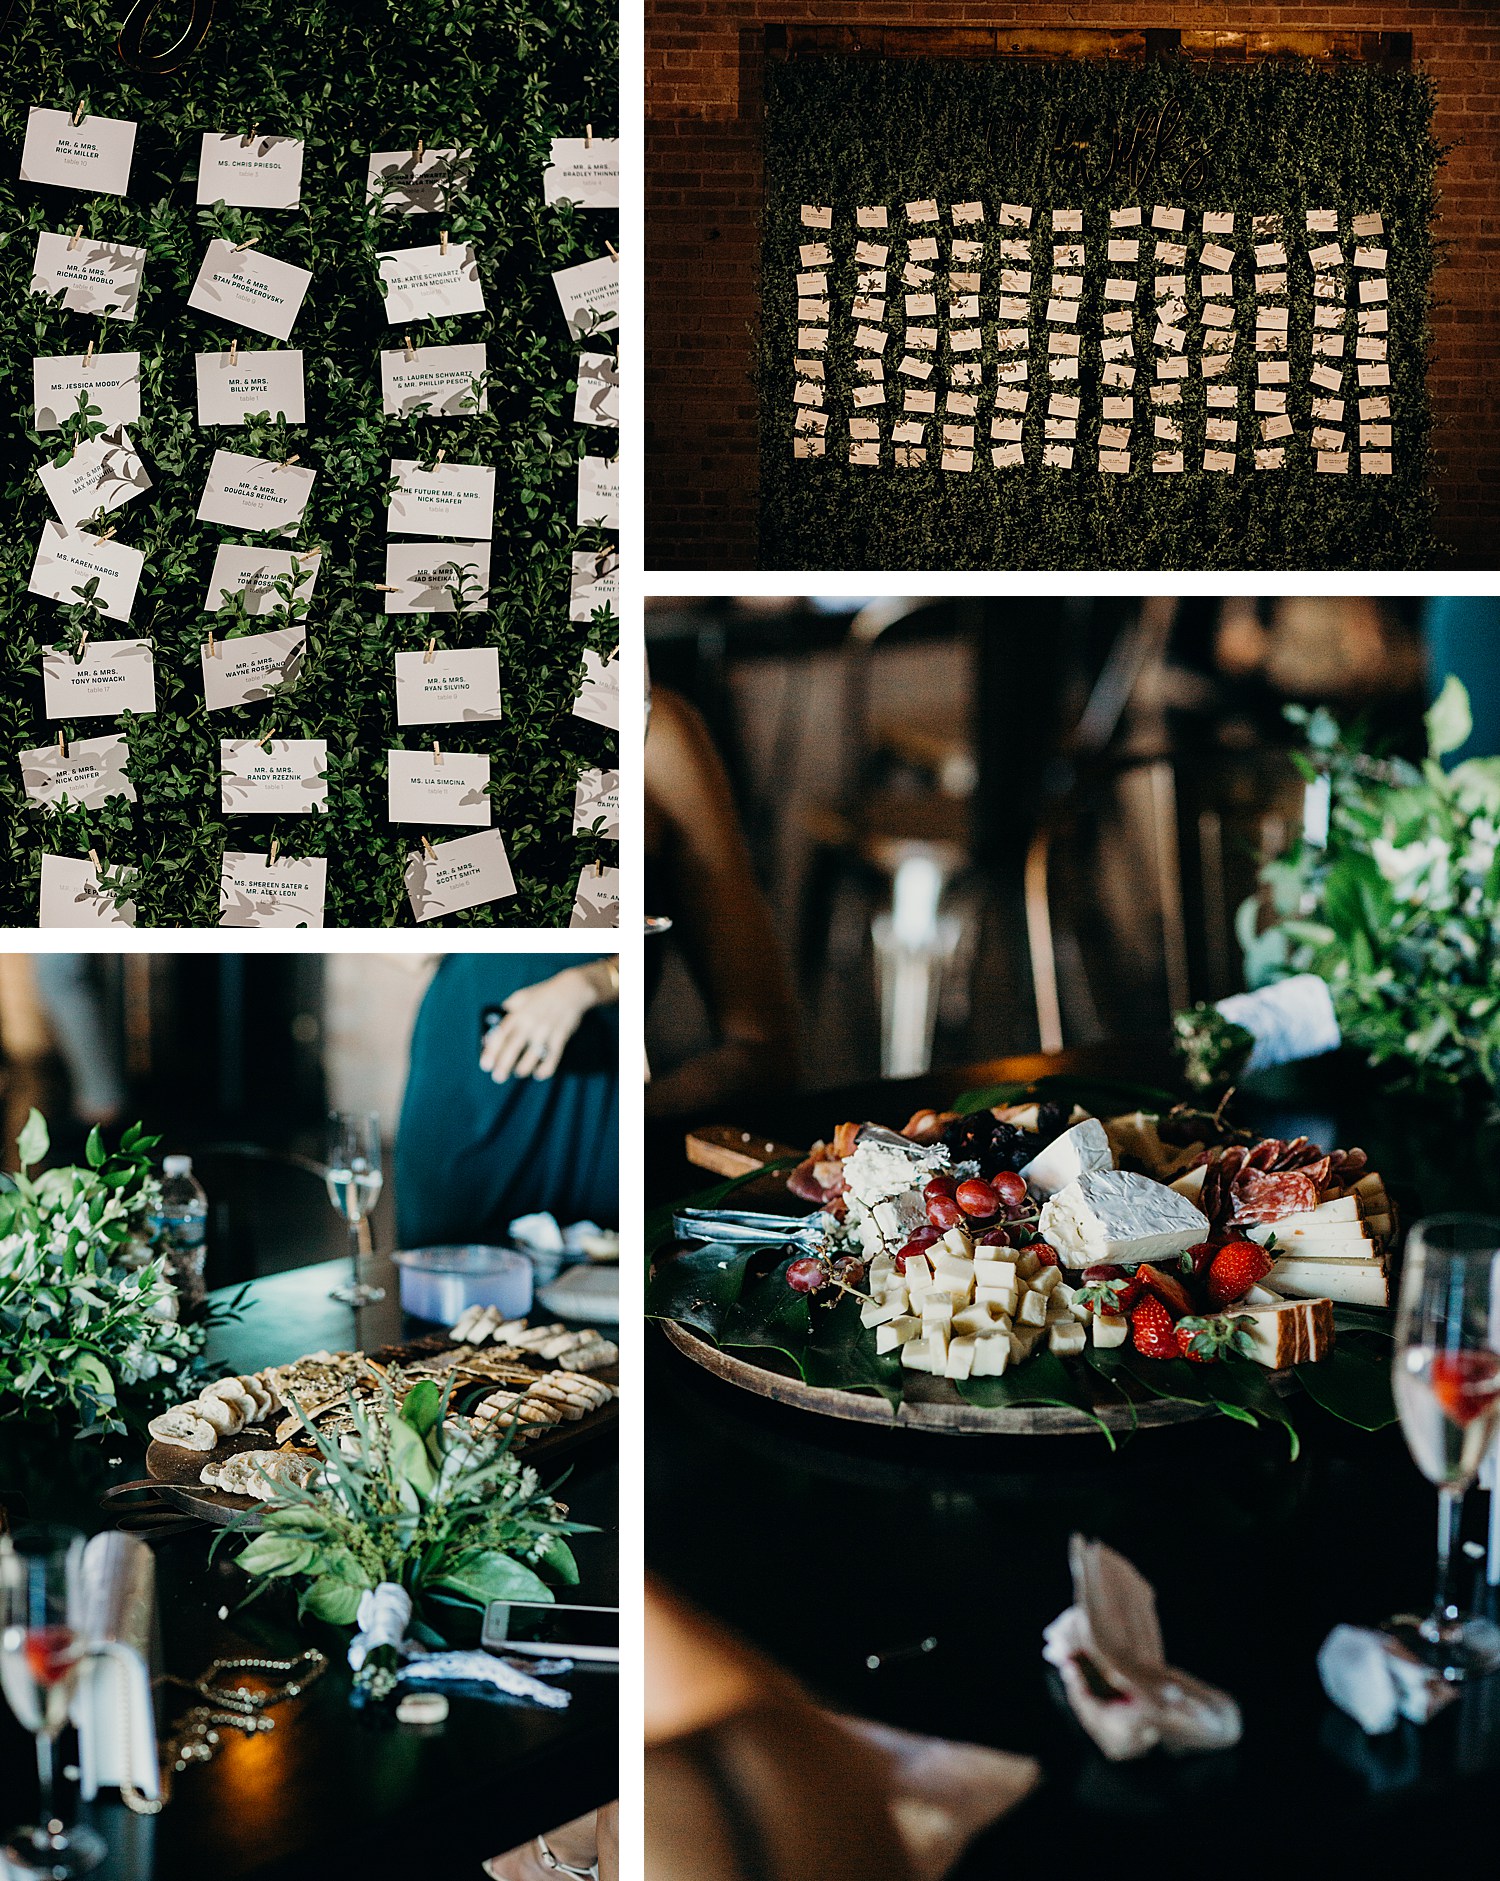 Boho Industrial Wedding at Morgan Manufacturing planned LK Events in Chicago